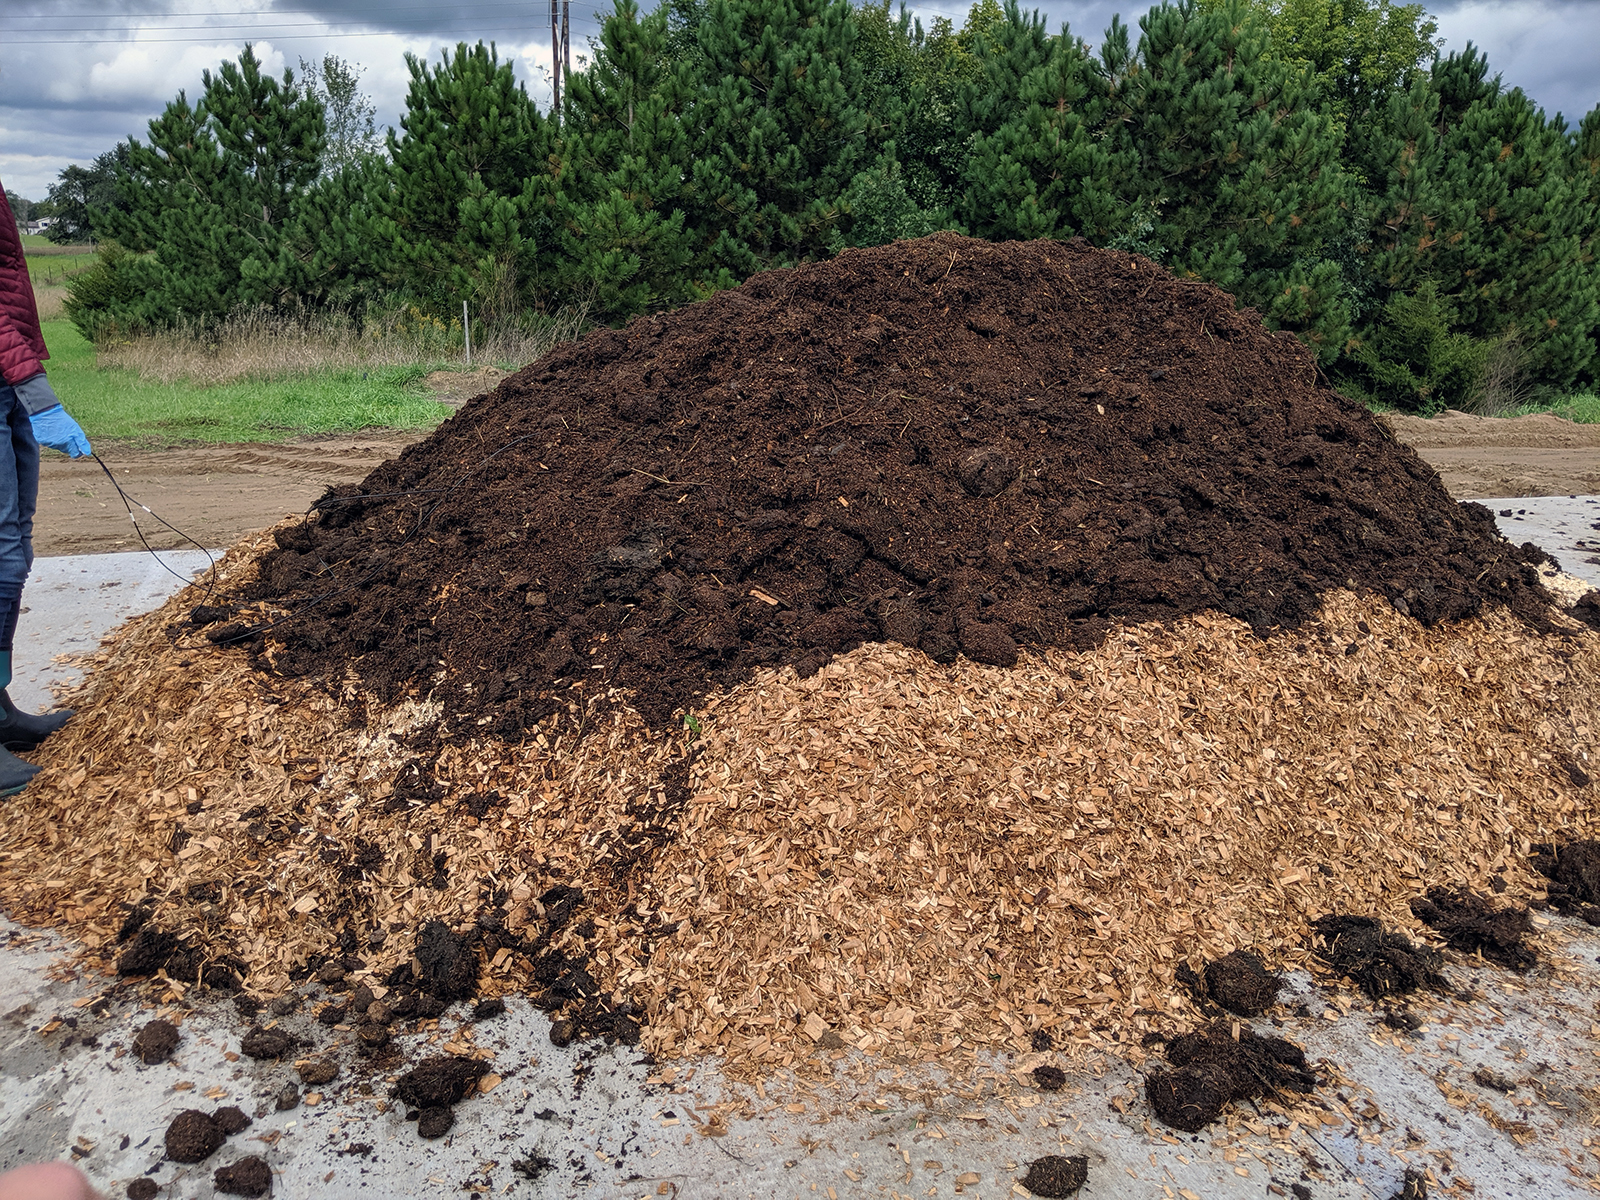 Compost pile with the media bed where the animal was placed and cover material on top.